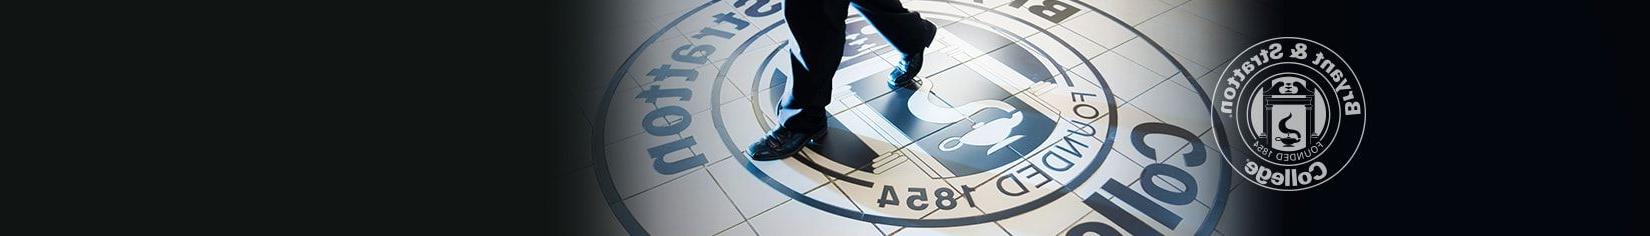 Student walking across 布赖恩特 and Stratton seal on campus floor